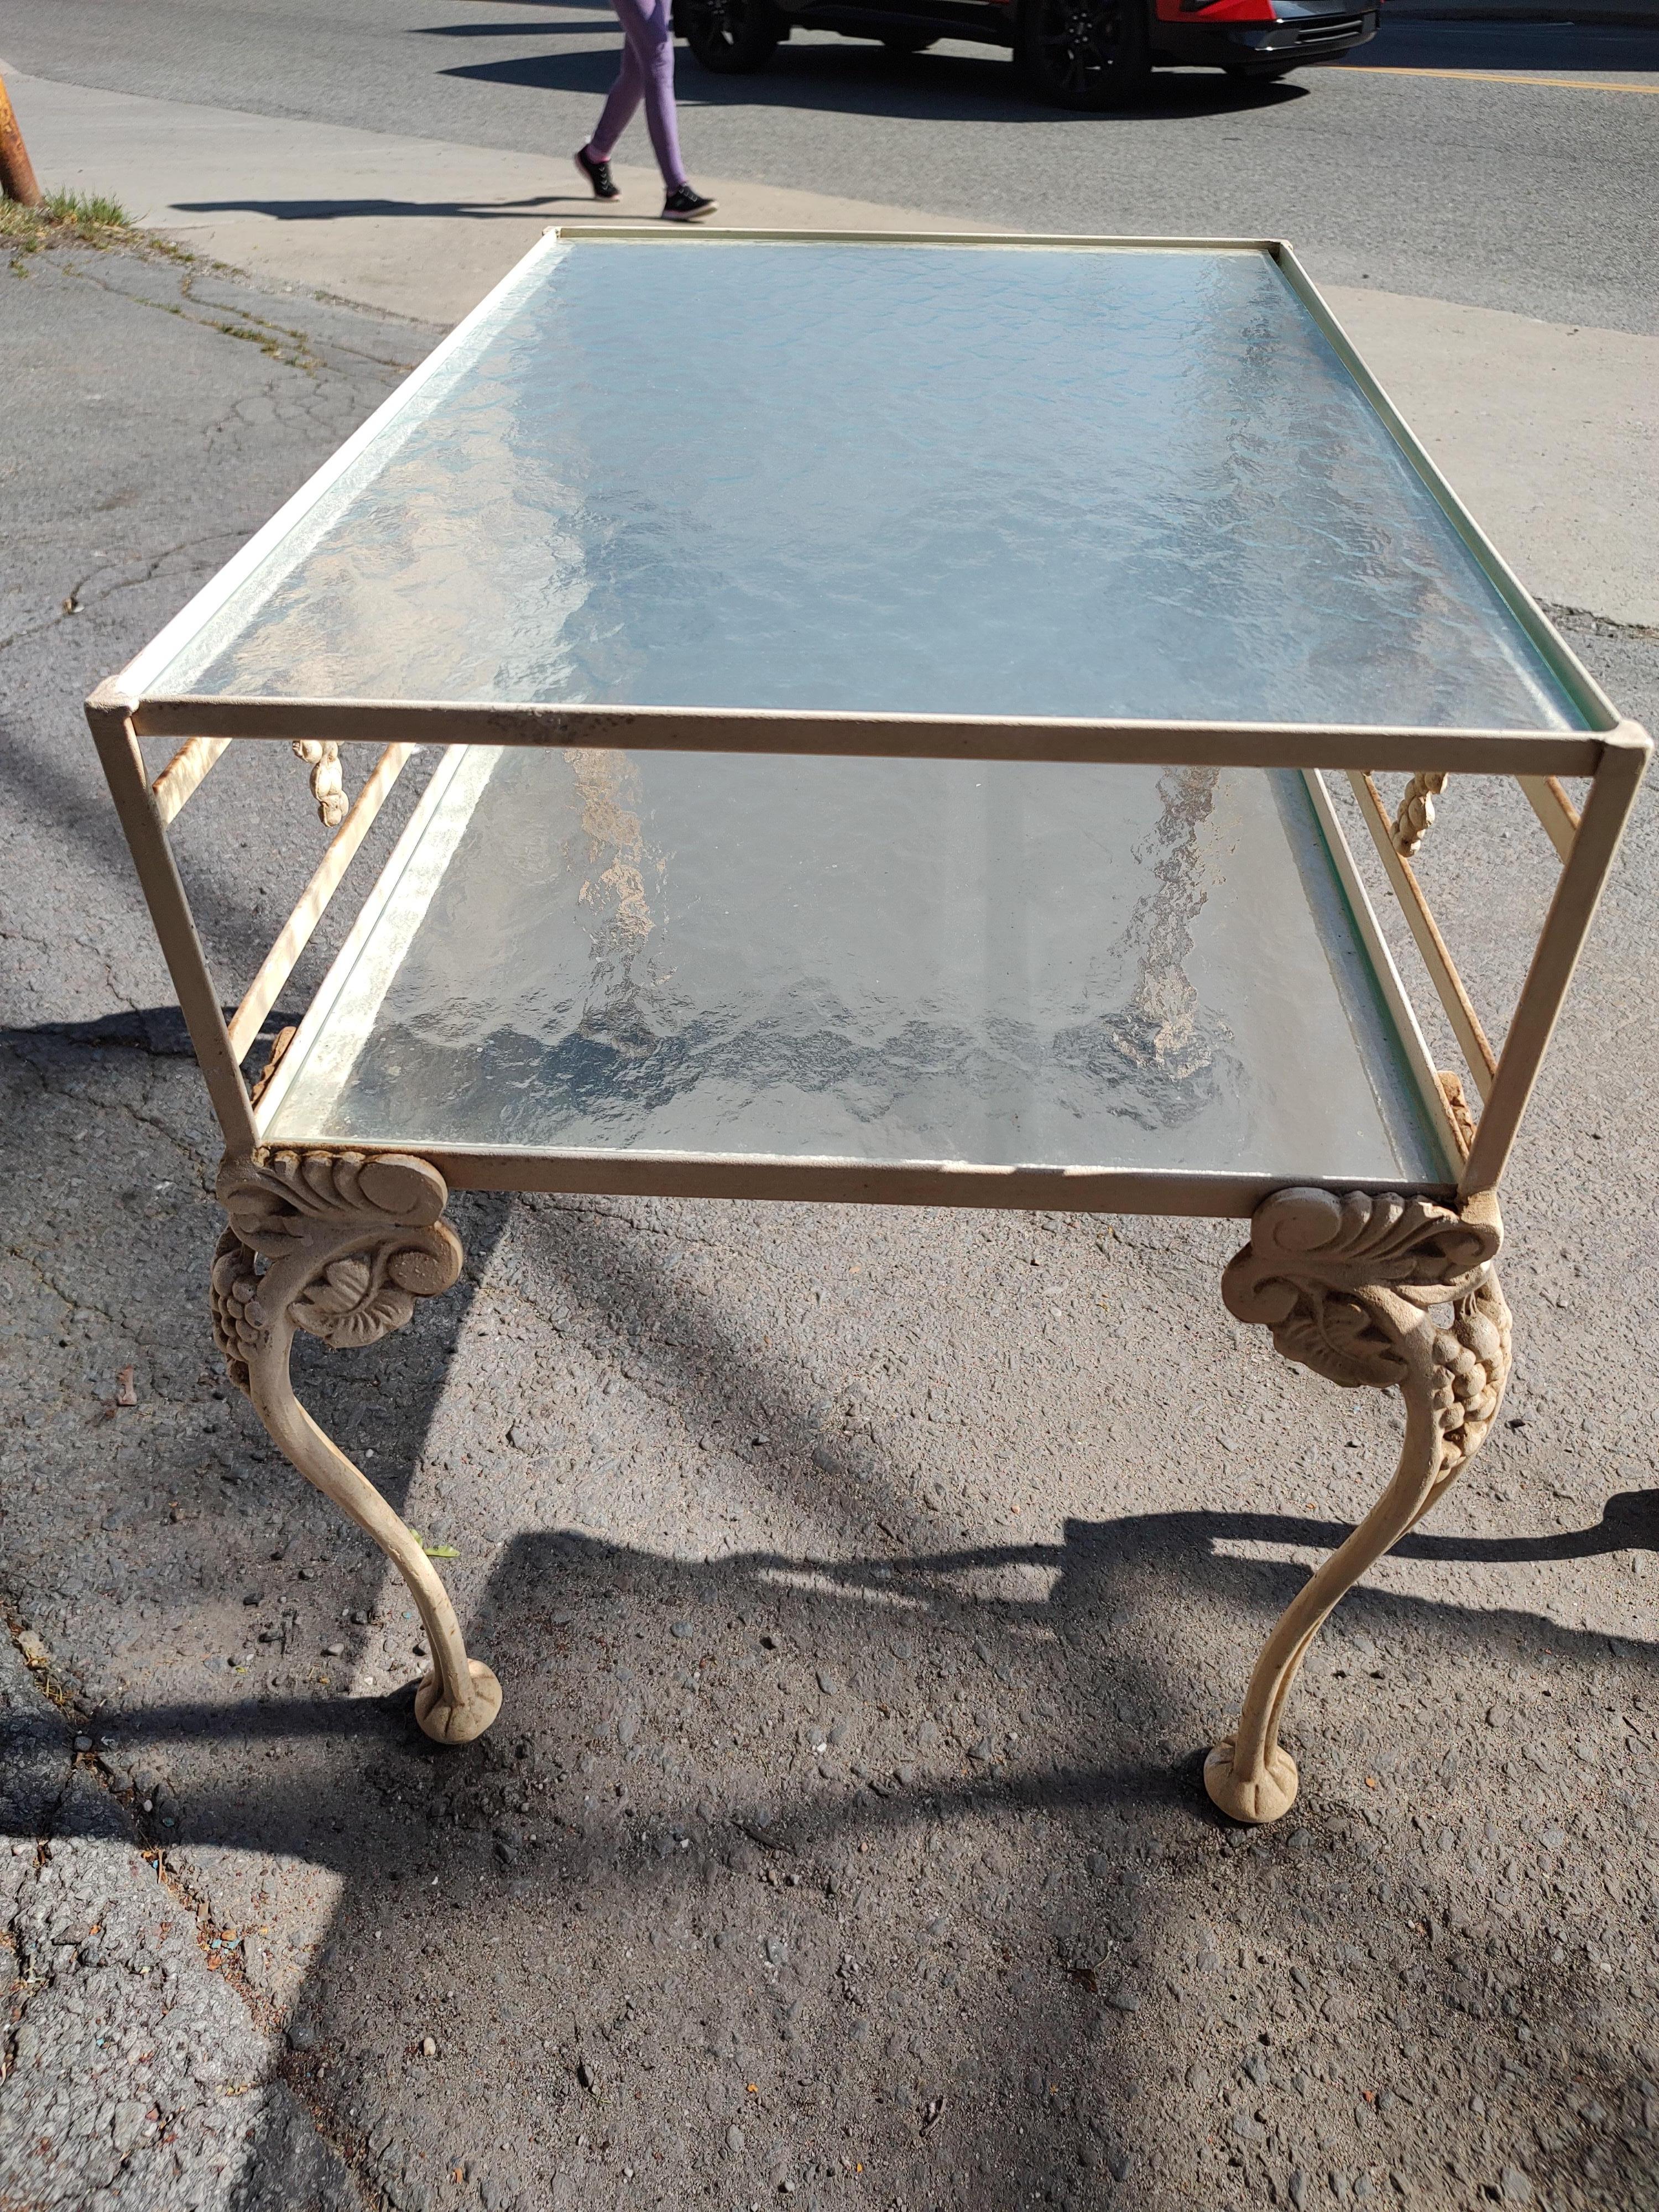 Late 20th Century Pair of Cast Aluminum End Tables by Molla of Italy Obscure Glass Tops with Shelf For Sale